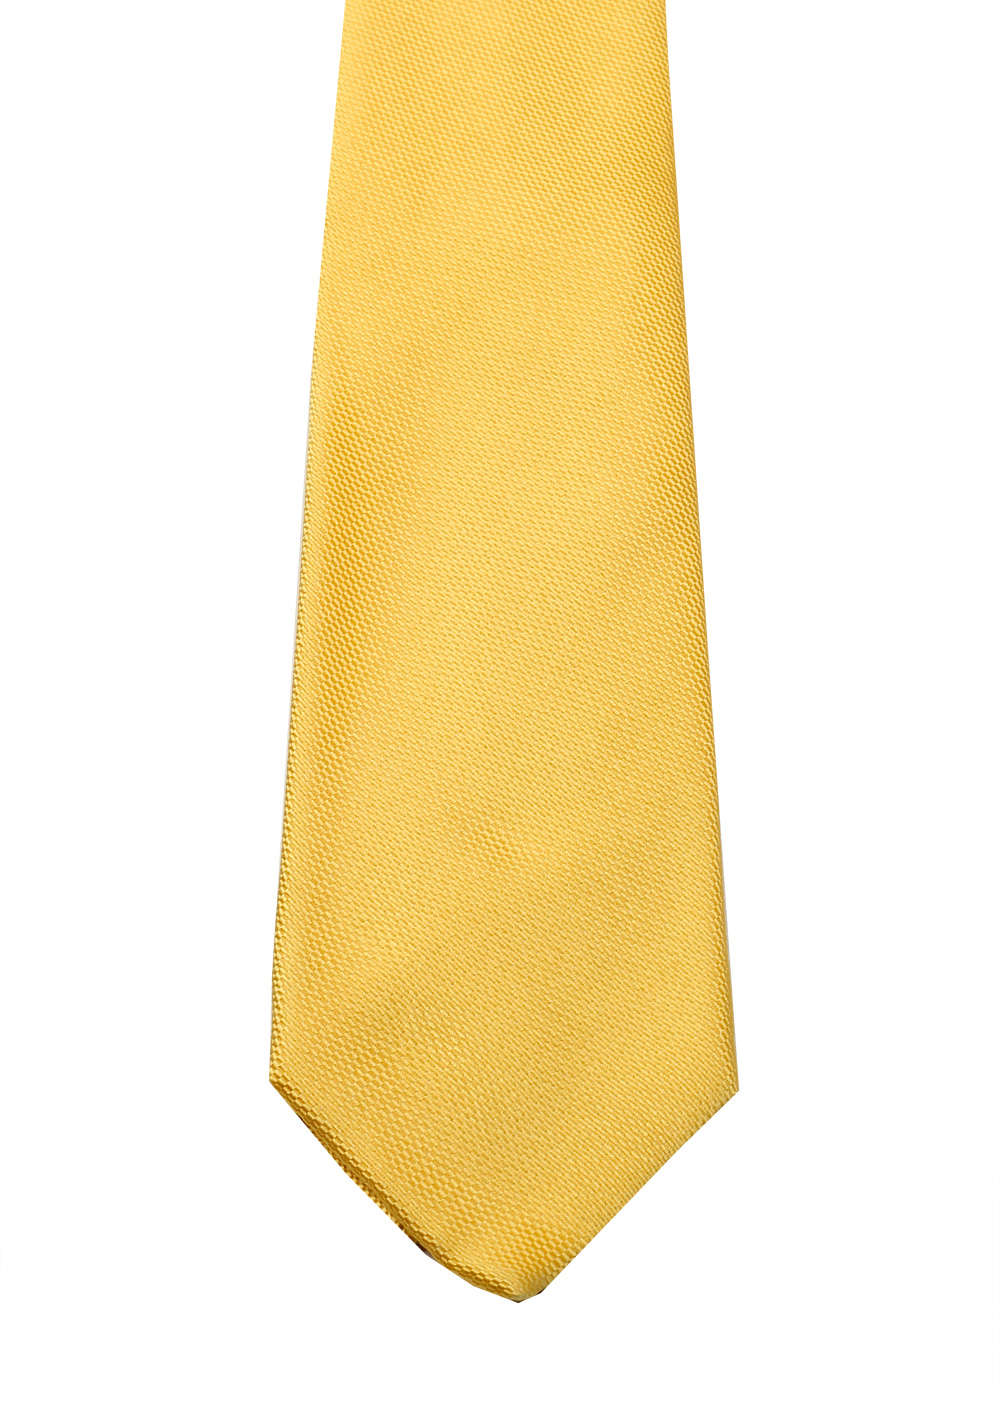 Gucci Yellow Patterned Tie | Costume Limité